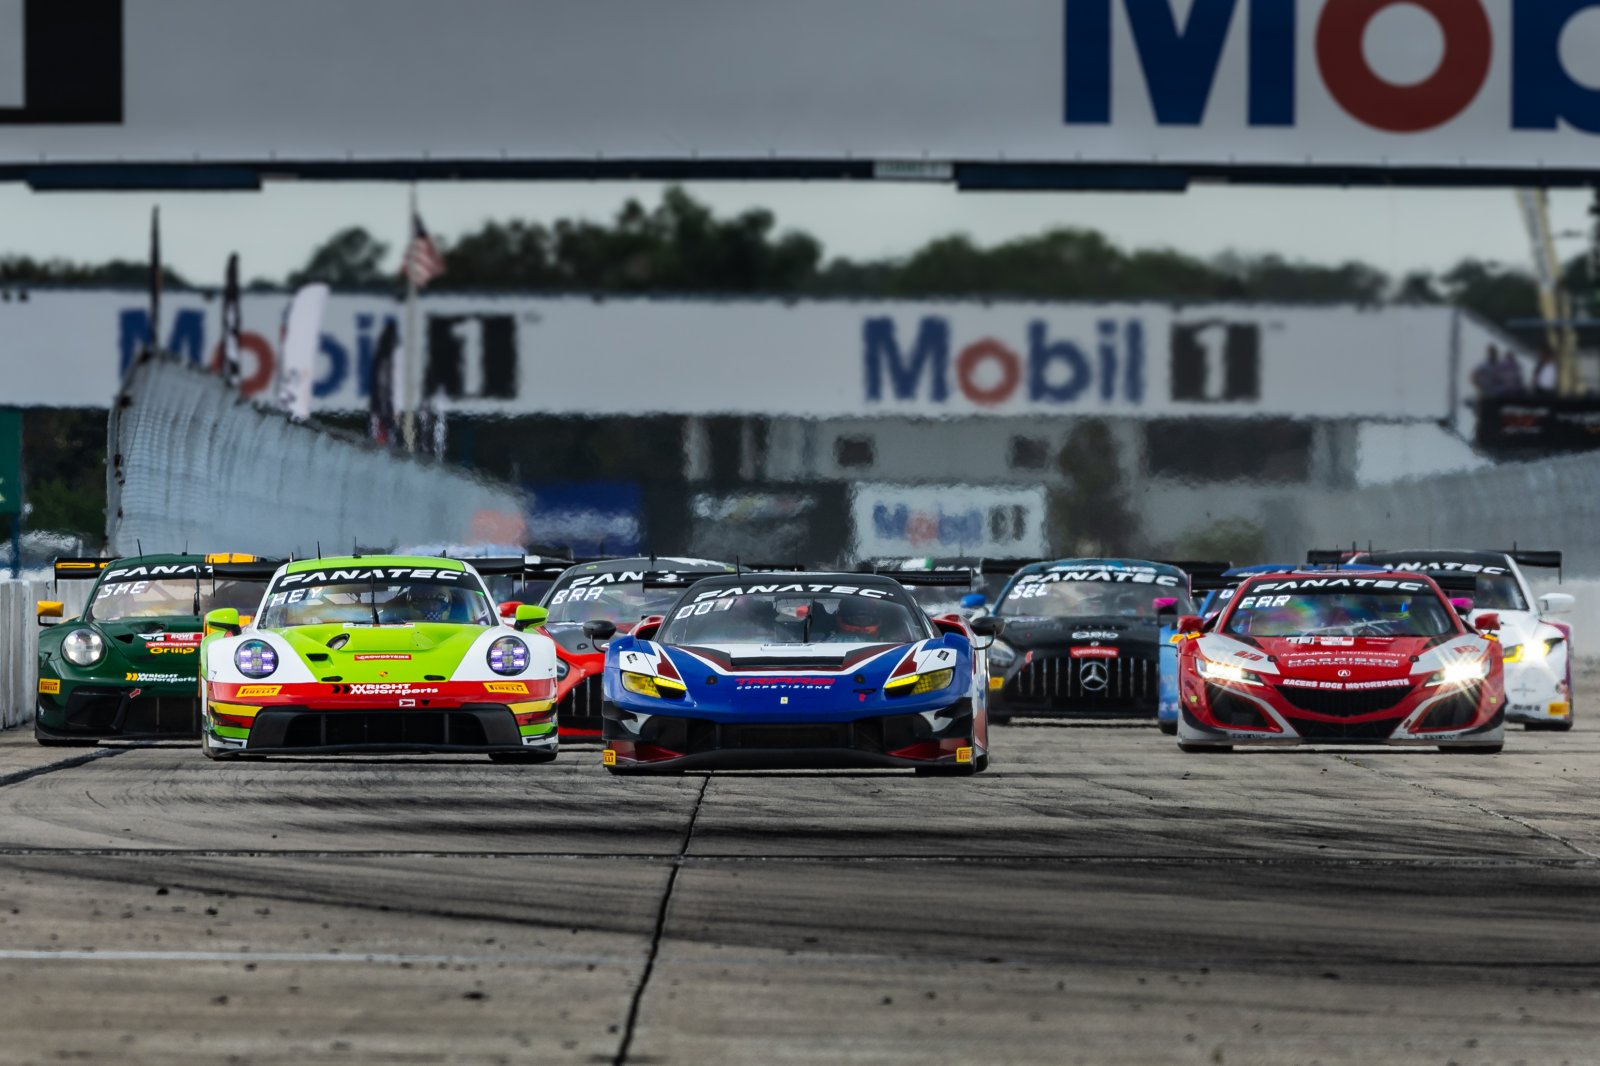 Sebring Provisional Race 2 Results Amended following Tech Infraction